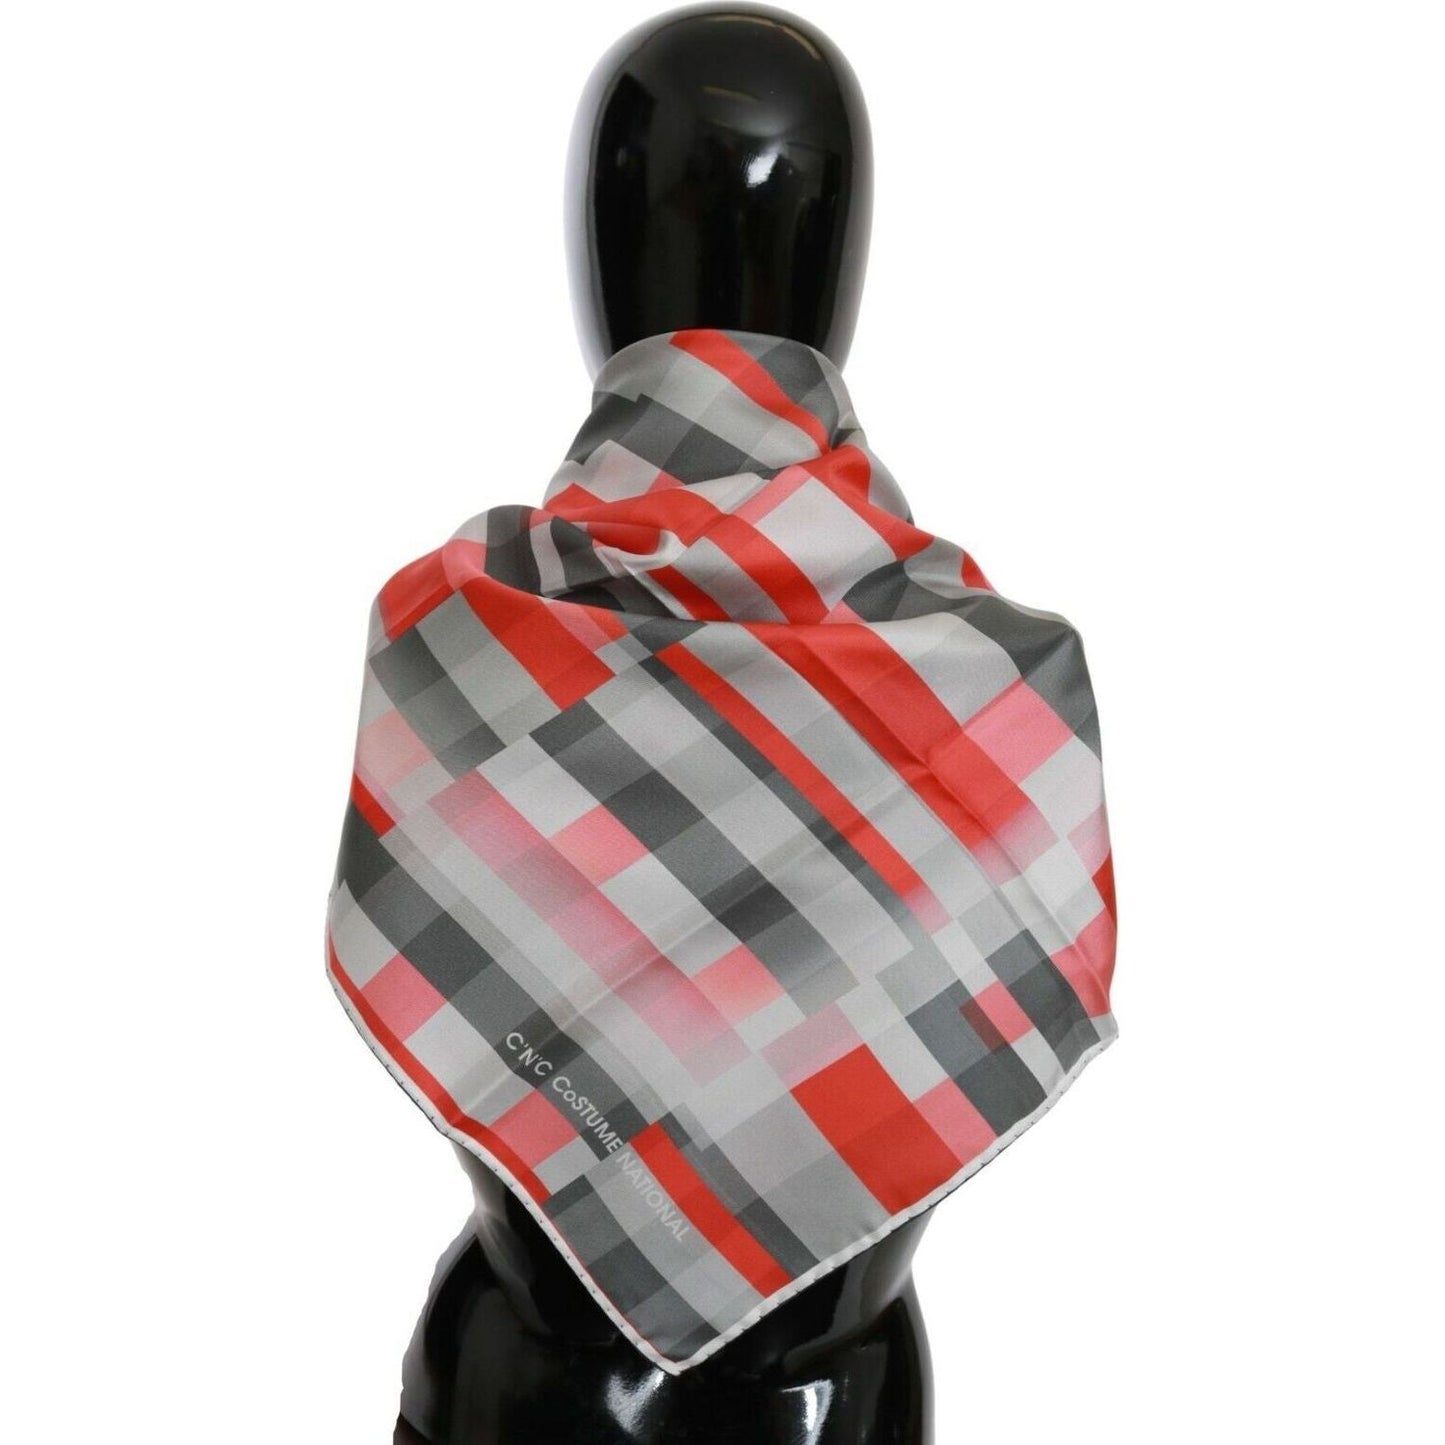 Costume National Elegant Silk Checkered Scarf in Gray and Red gray-red-silk-shawl-foulard-wrap-scarf-1 s-l1600-2-3-0f059e87-7c4.jpg